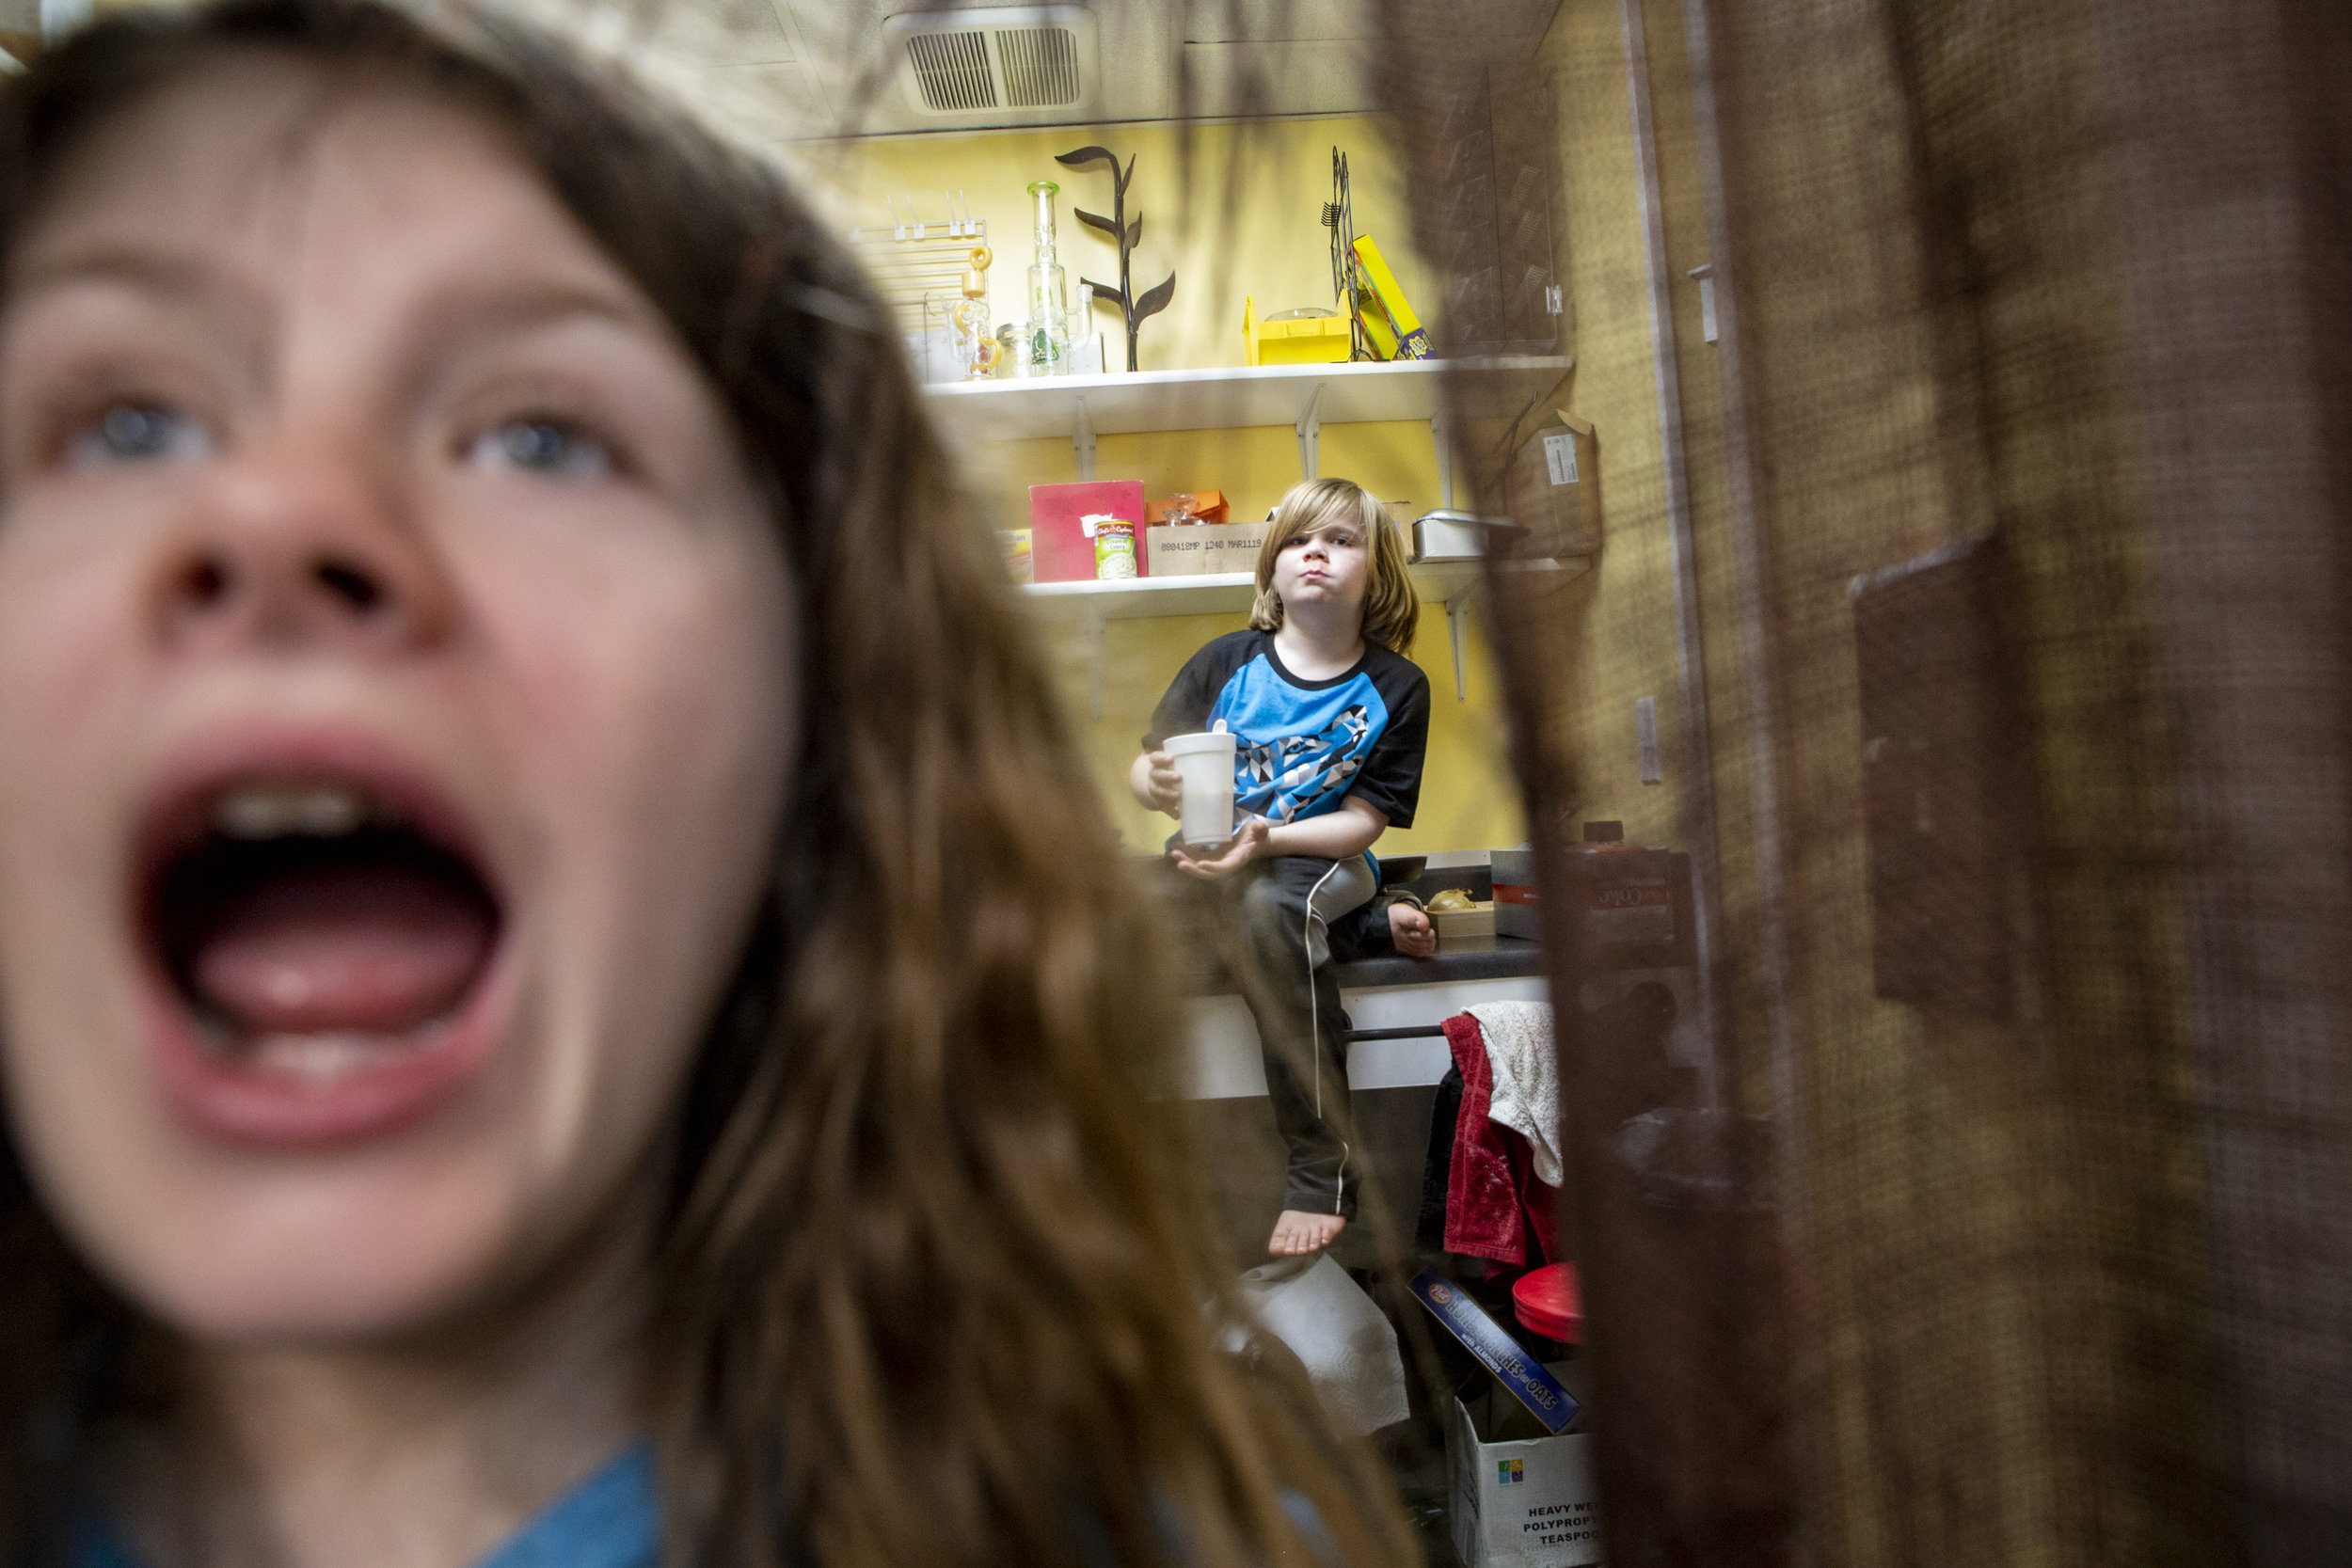  Siblings Lizzy, 10, and Adam Gilchrist, 6, get ready for school in the back kitchen of Gilchrist Convenient Store every morning. “They were raised here,” said their father Alan Gilchrist, who also grew up playing and working in the family store. 